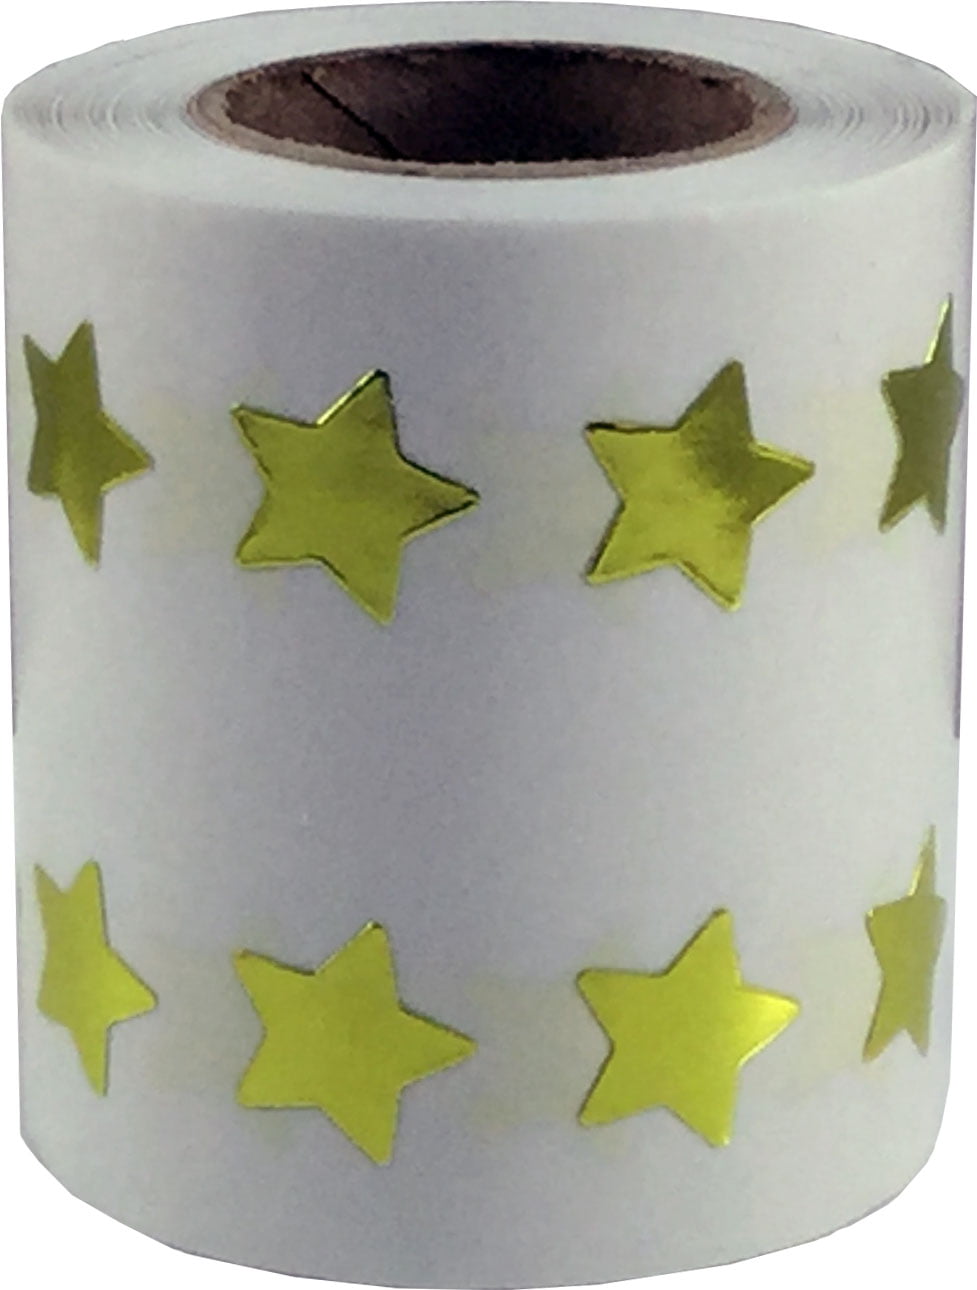 Self-Adhesive 3500 Count,100 Sheet WXJ13 1.5 cm Gold Star Stickers Labels 